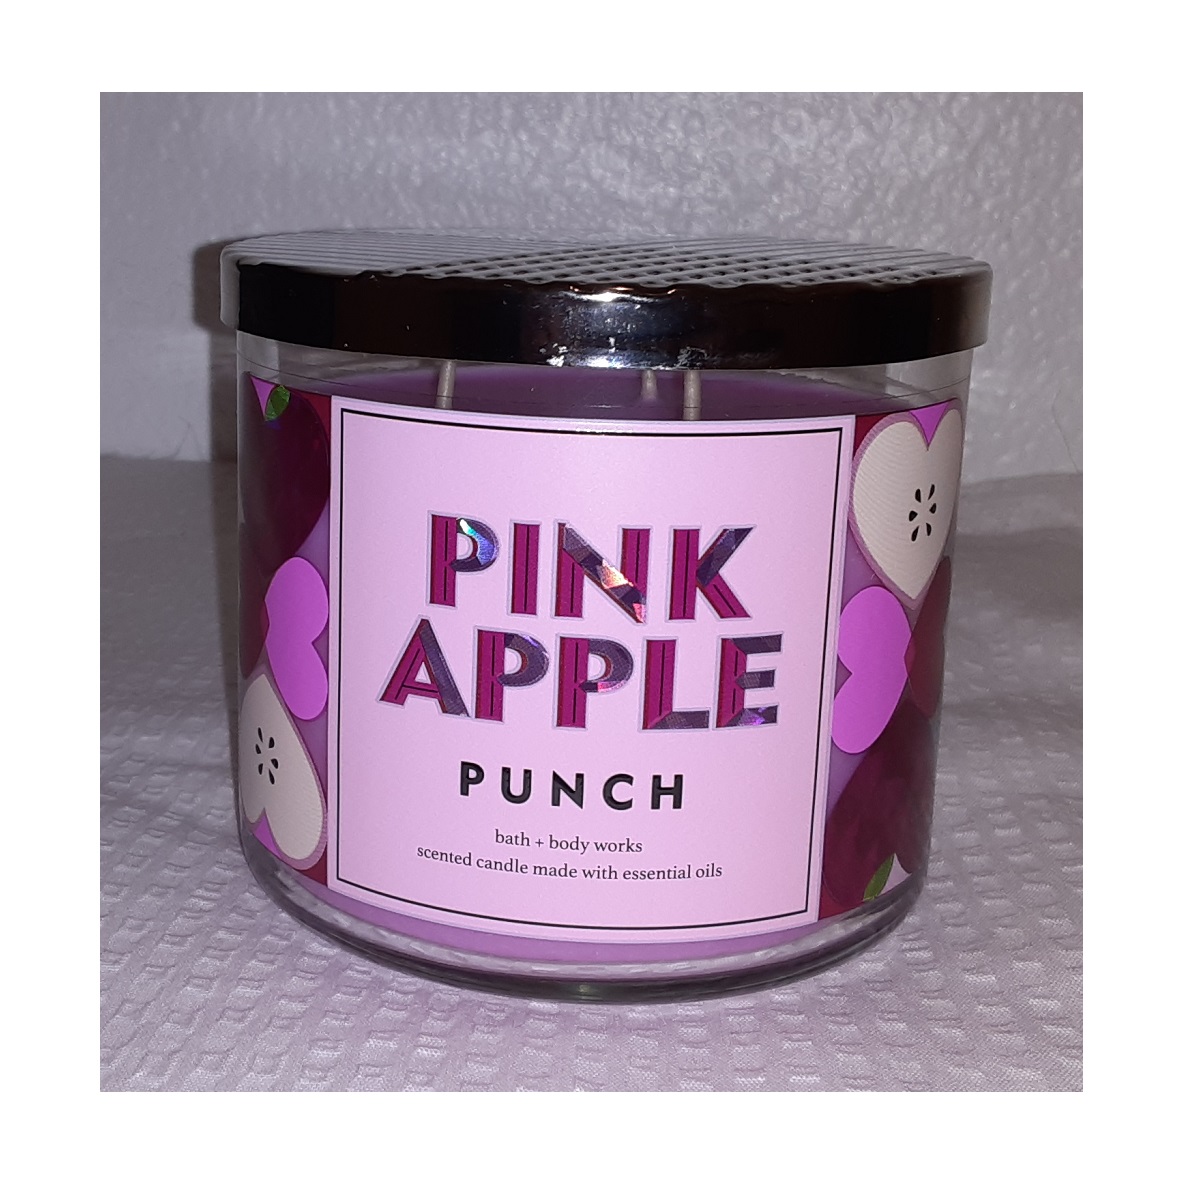 Pink Apple Punch scented candle - 3 wick candle - bath & body works